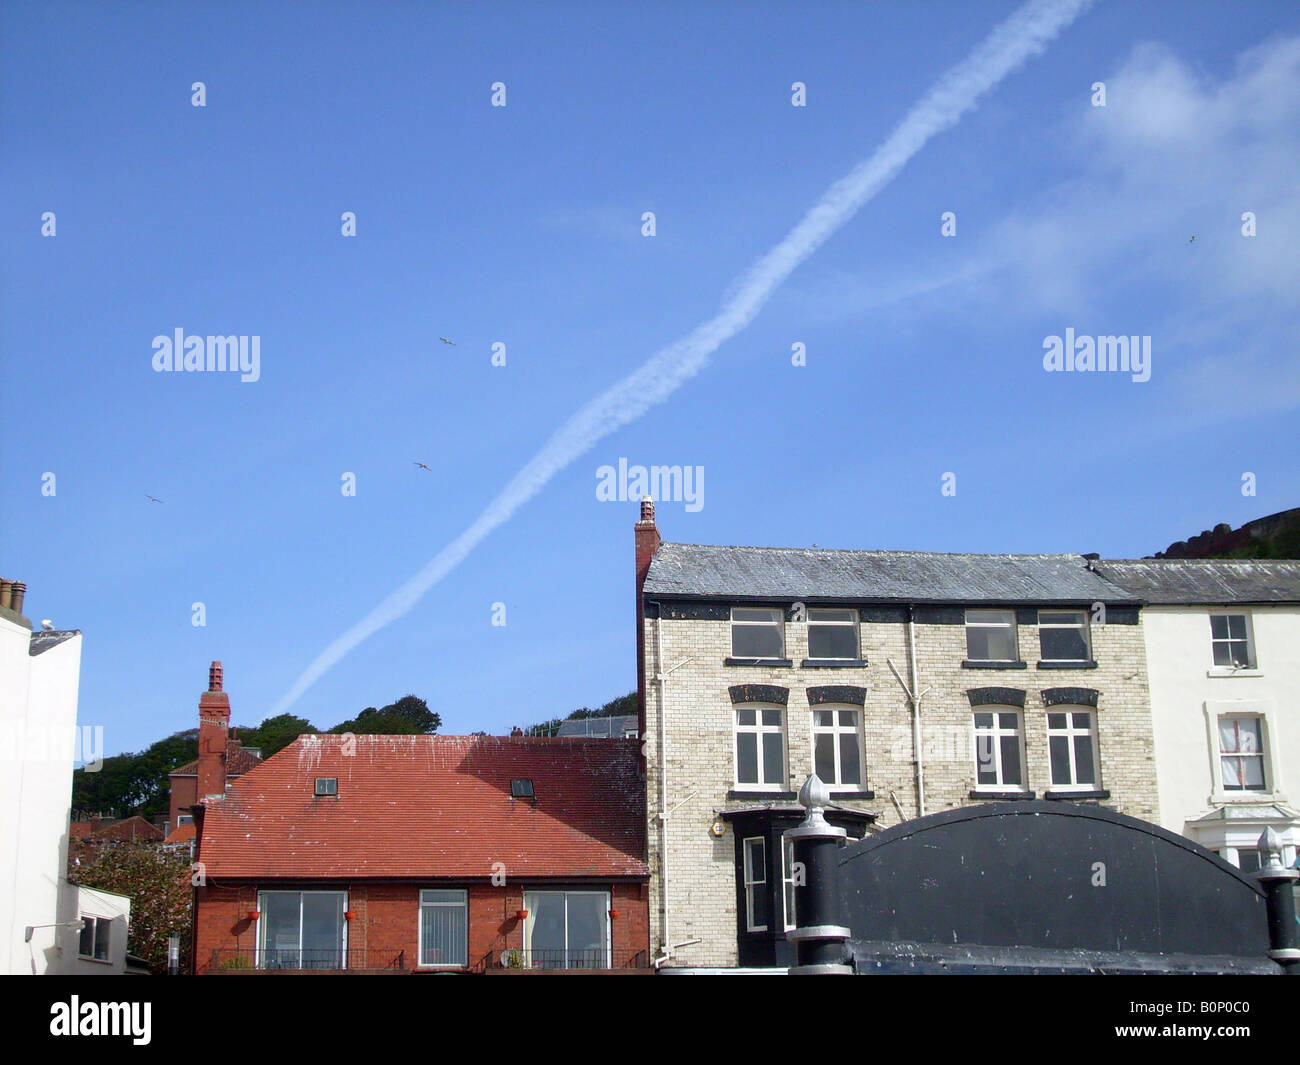 Vapour trail over old town houses in Scarborough, North Yorkshire, England. Stock Photo